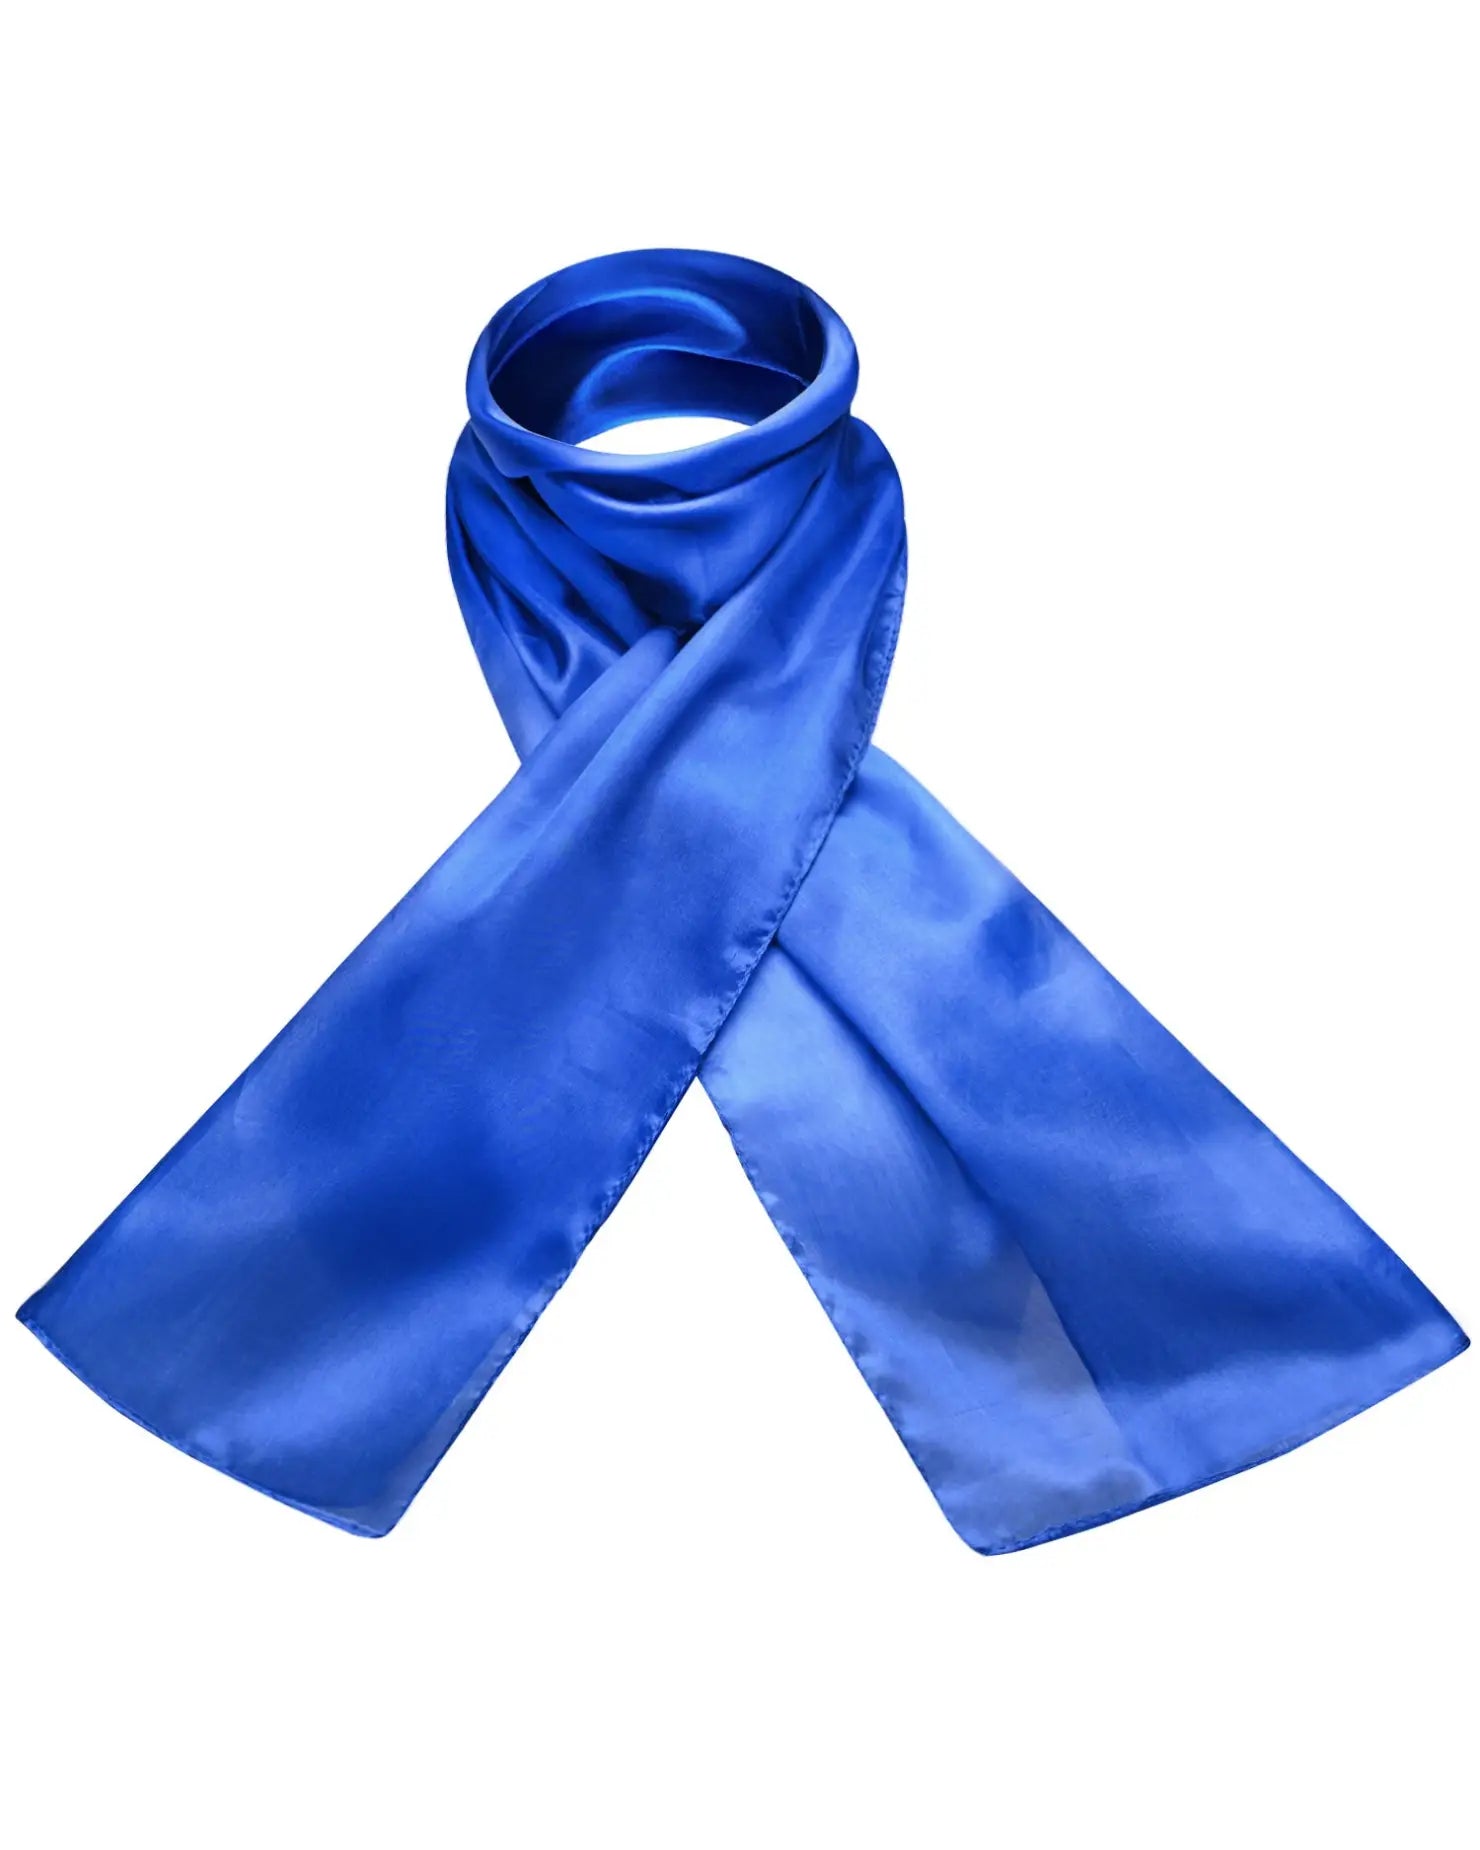 Blue silk mulberry scarf for multiuse purposes